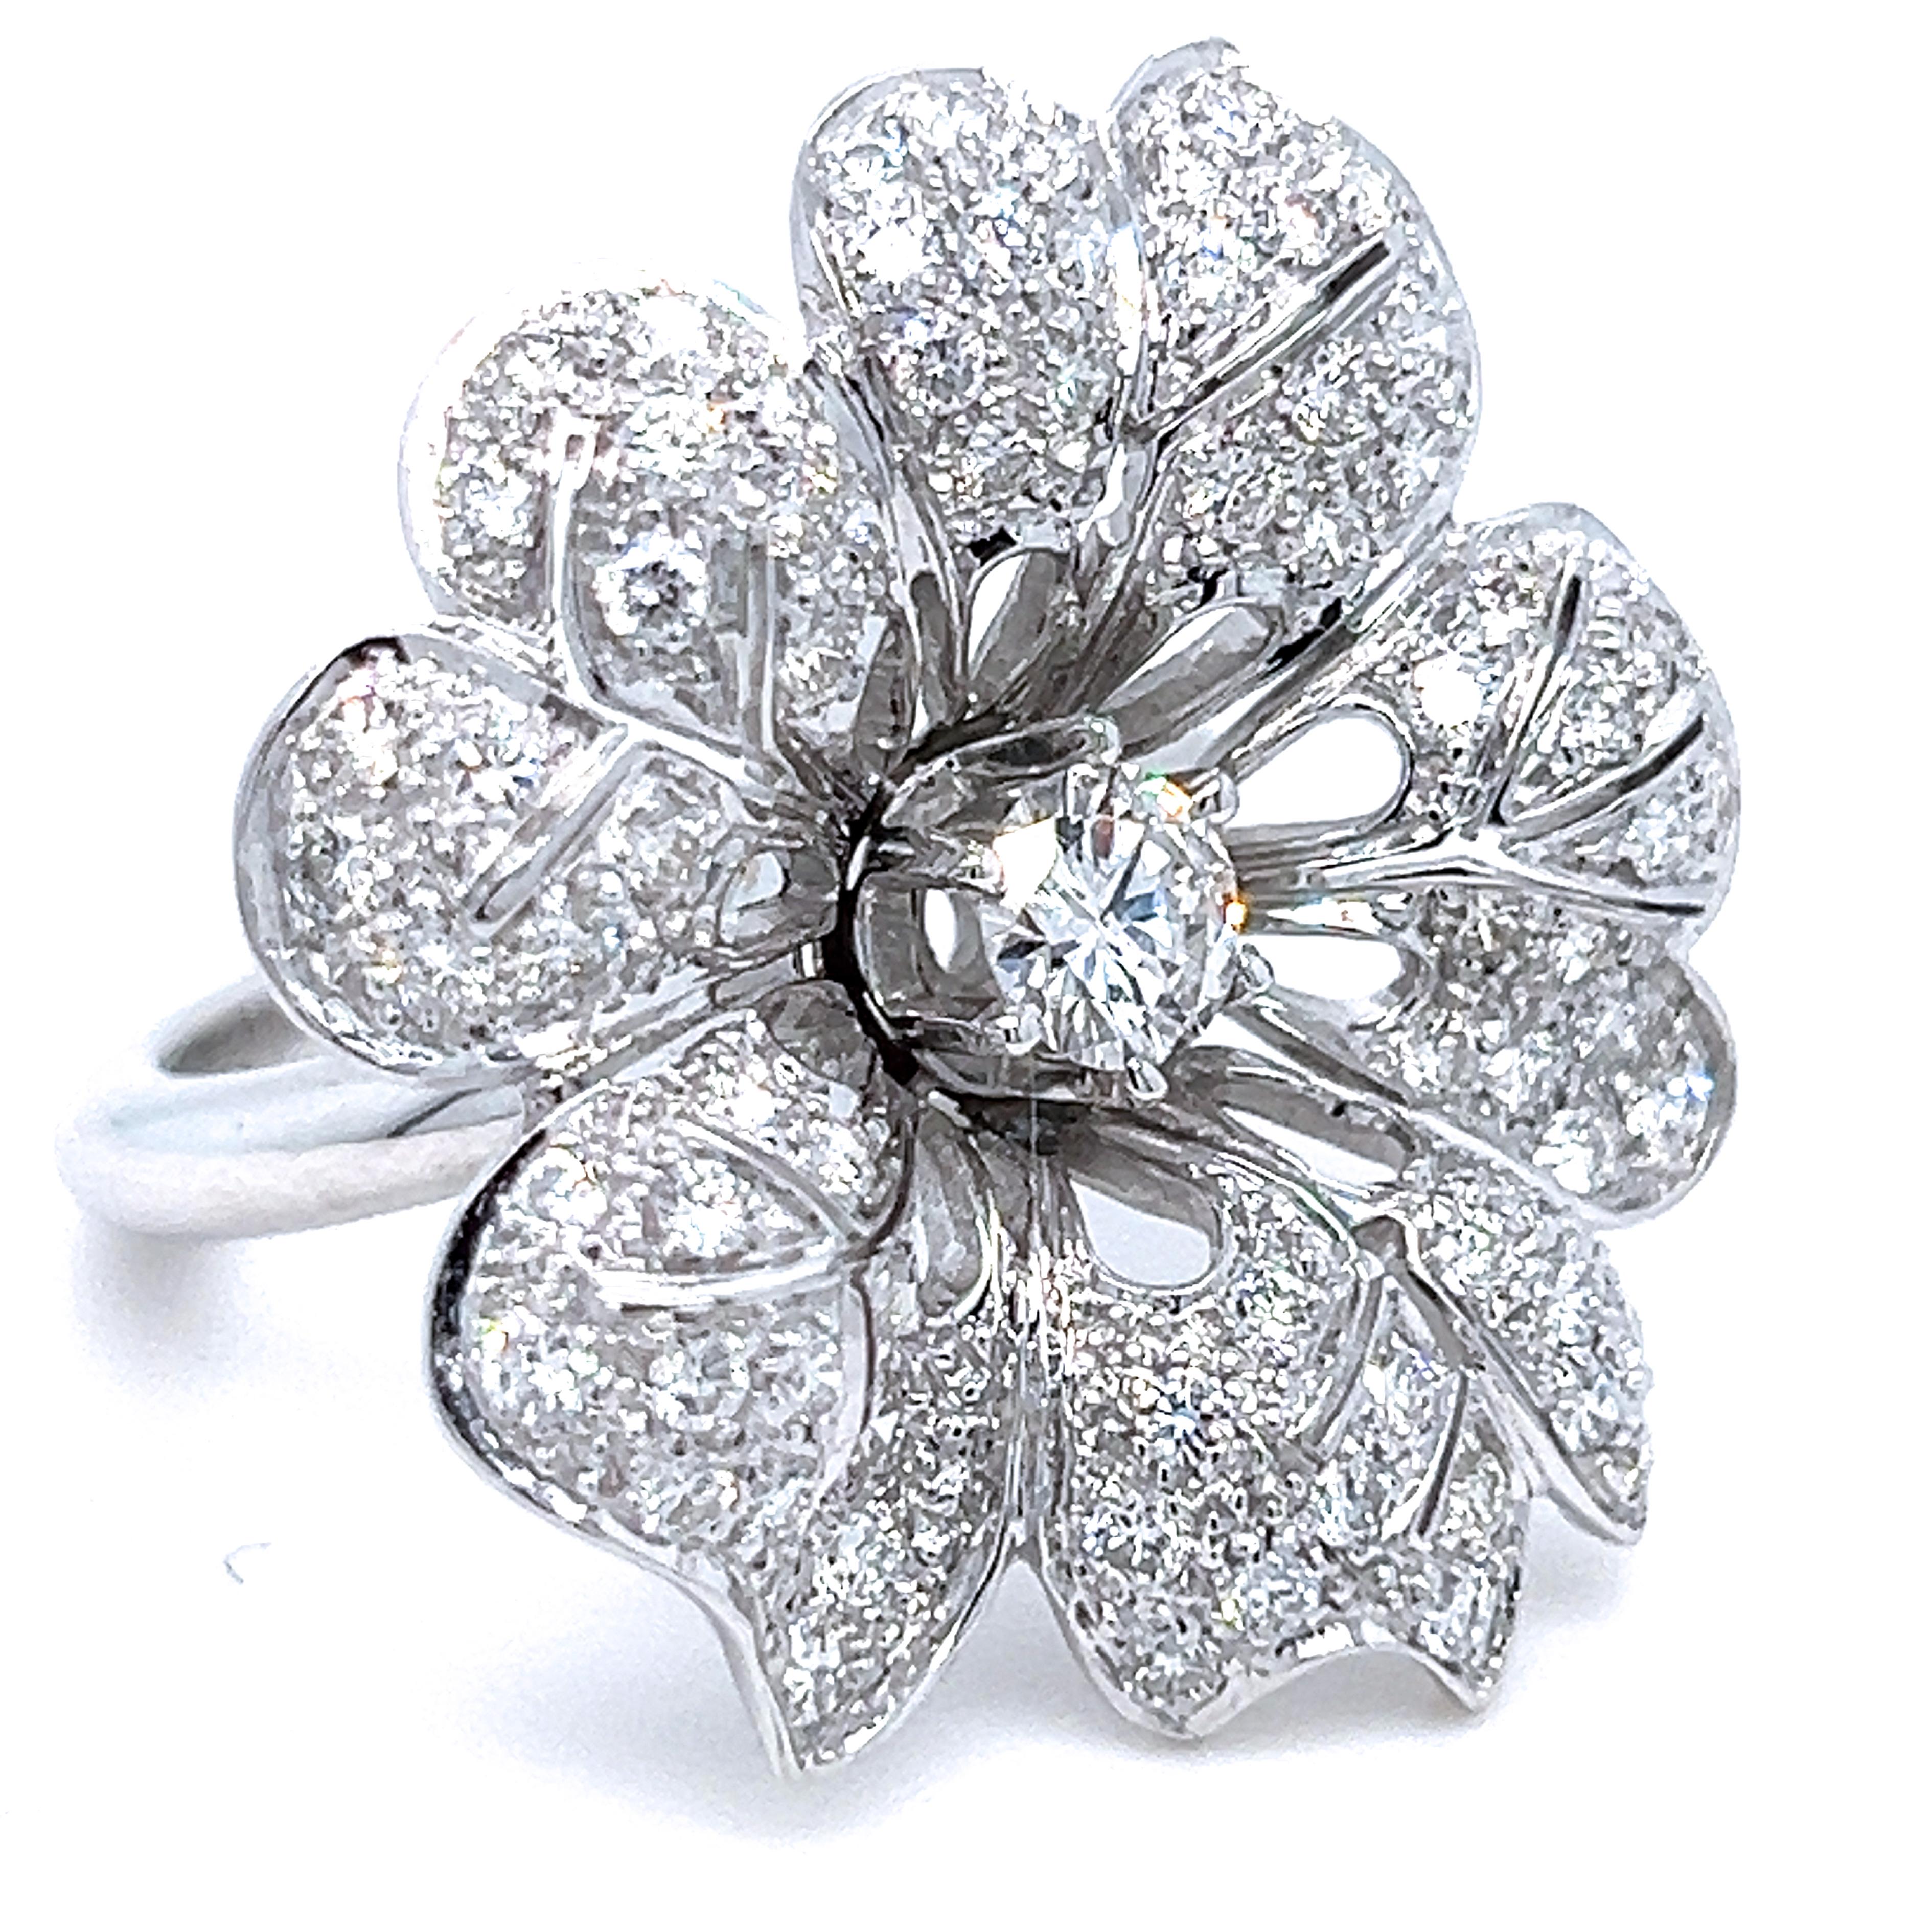 Sumptuos, beautifully handcrafted original 1970 cocktail ring featuring one top quality 0.45kt brilliant cut white diamond surrounded by five round white diamond set leaves, 18 Carat white gold setting.  
US size 6 1/2
French Size 53
We are pleased